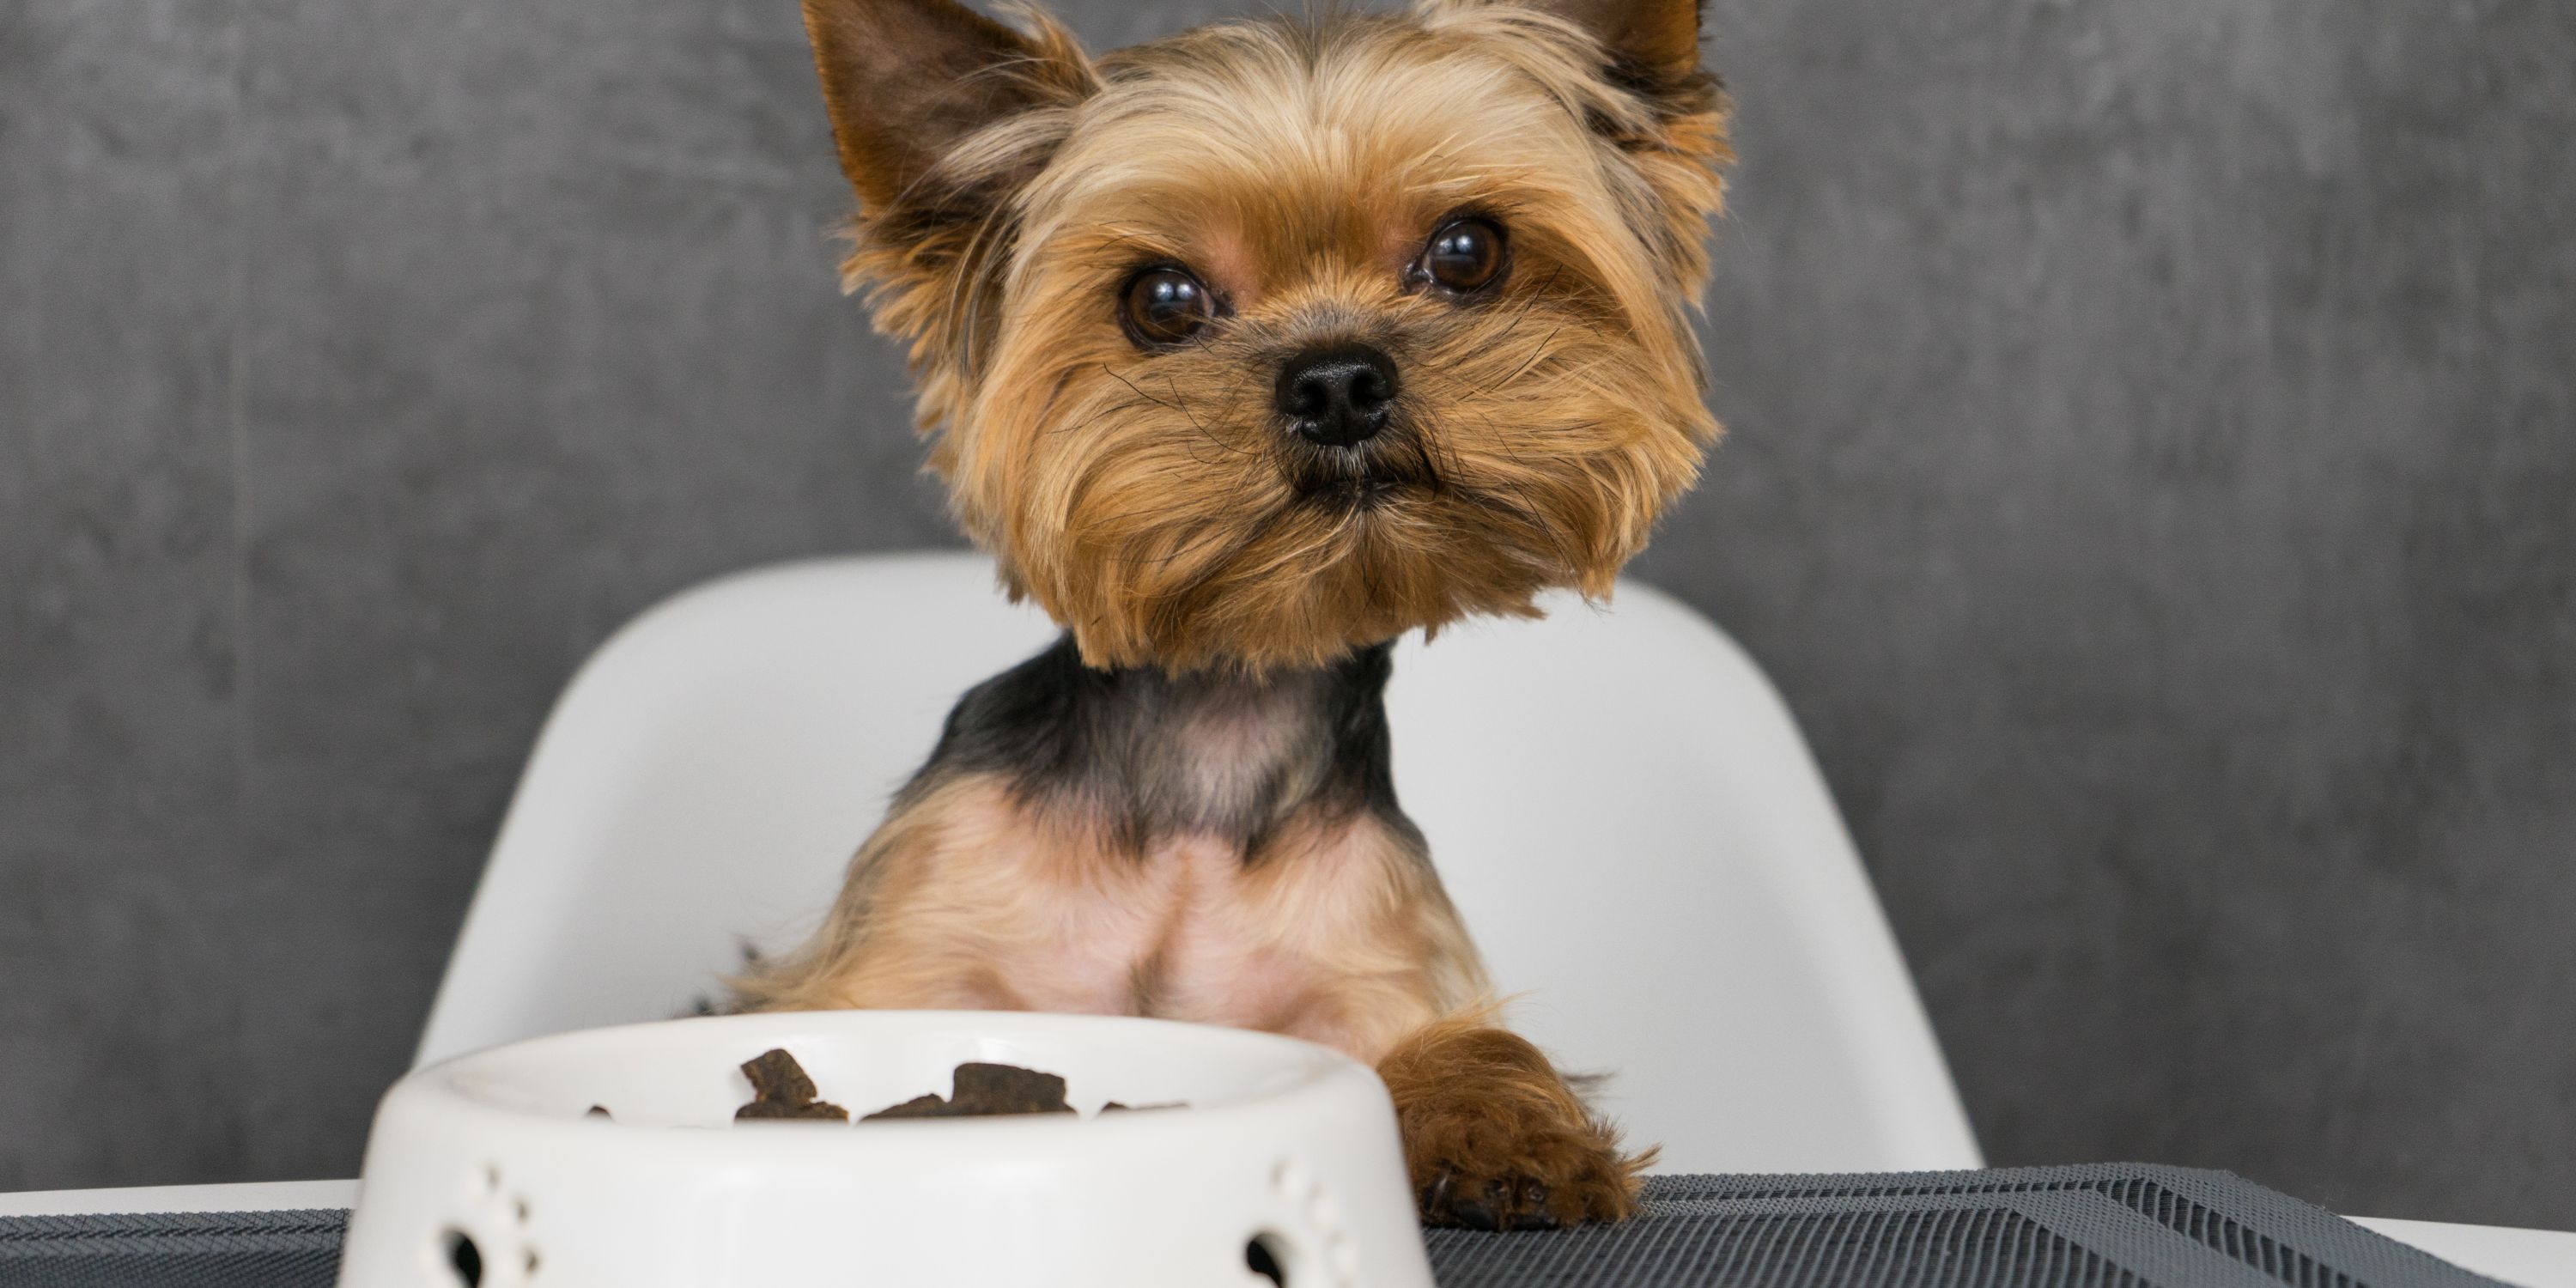 15 Best Dog Food For Yorkies (Yorkshire Terriers)